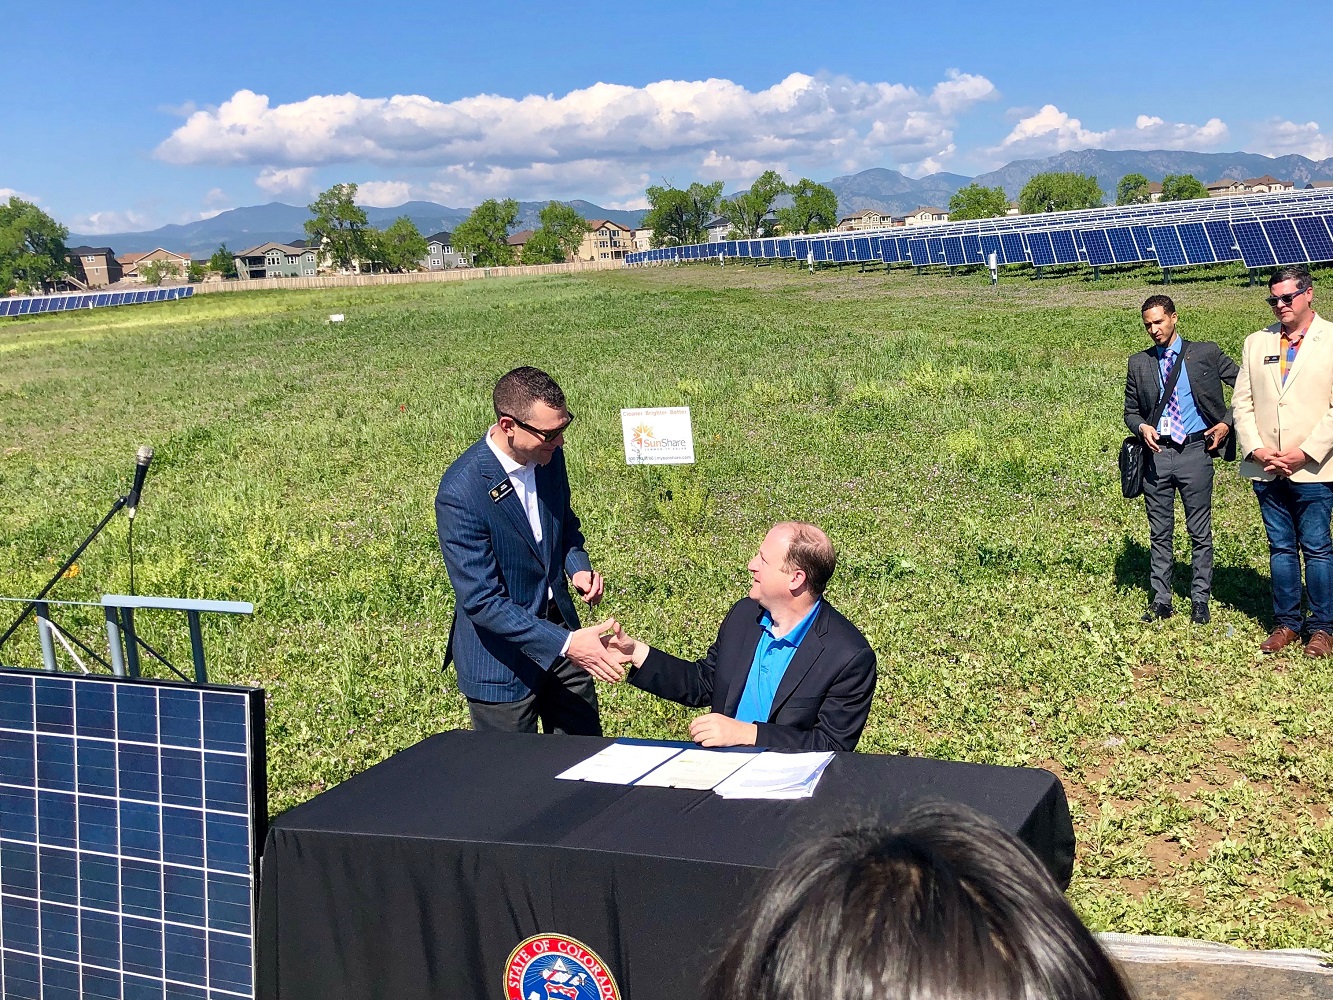 Gov. Polis signs bills on renewable energy, but what does that mean for Colorado’s energy future?